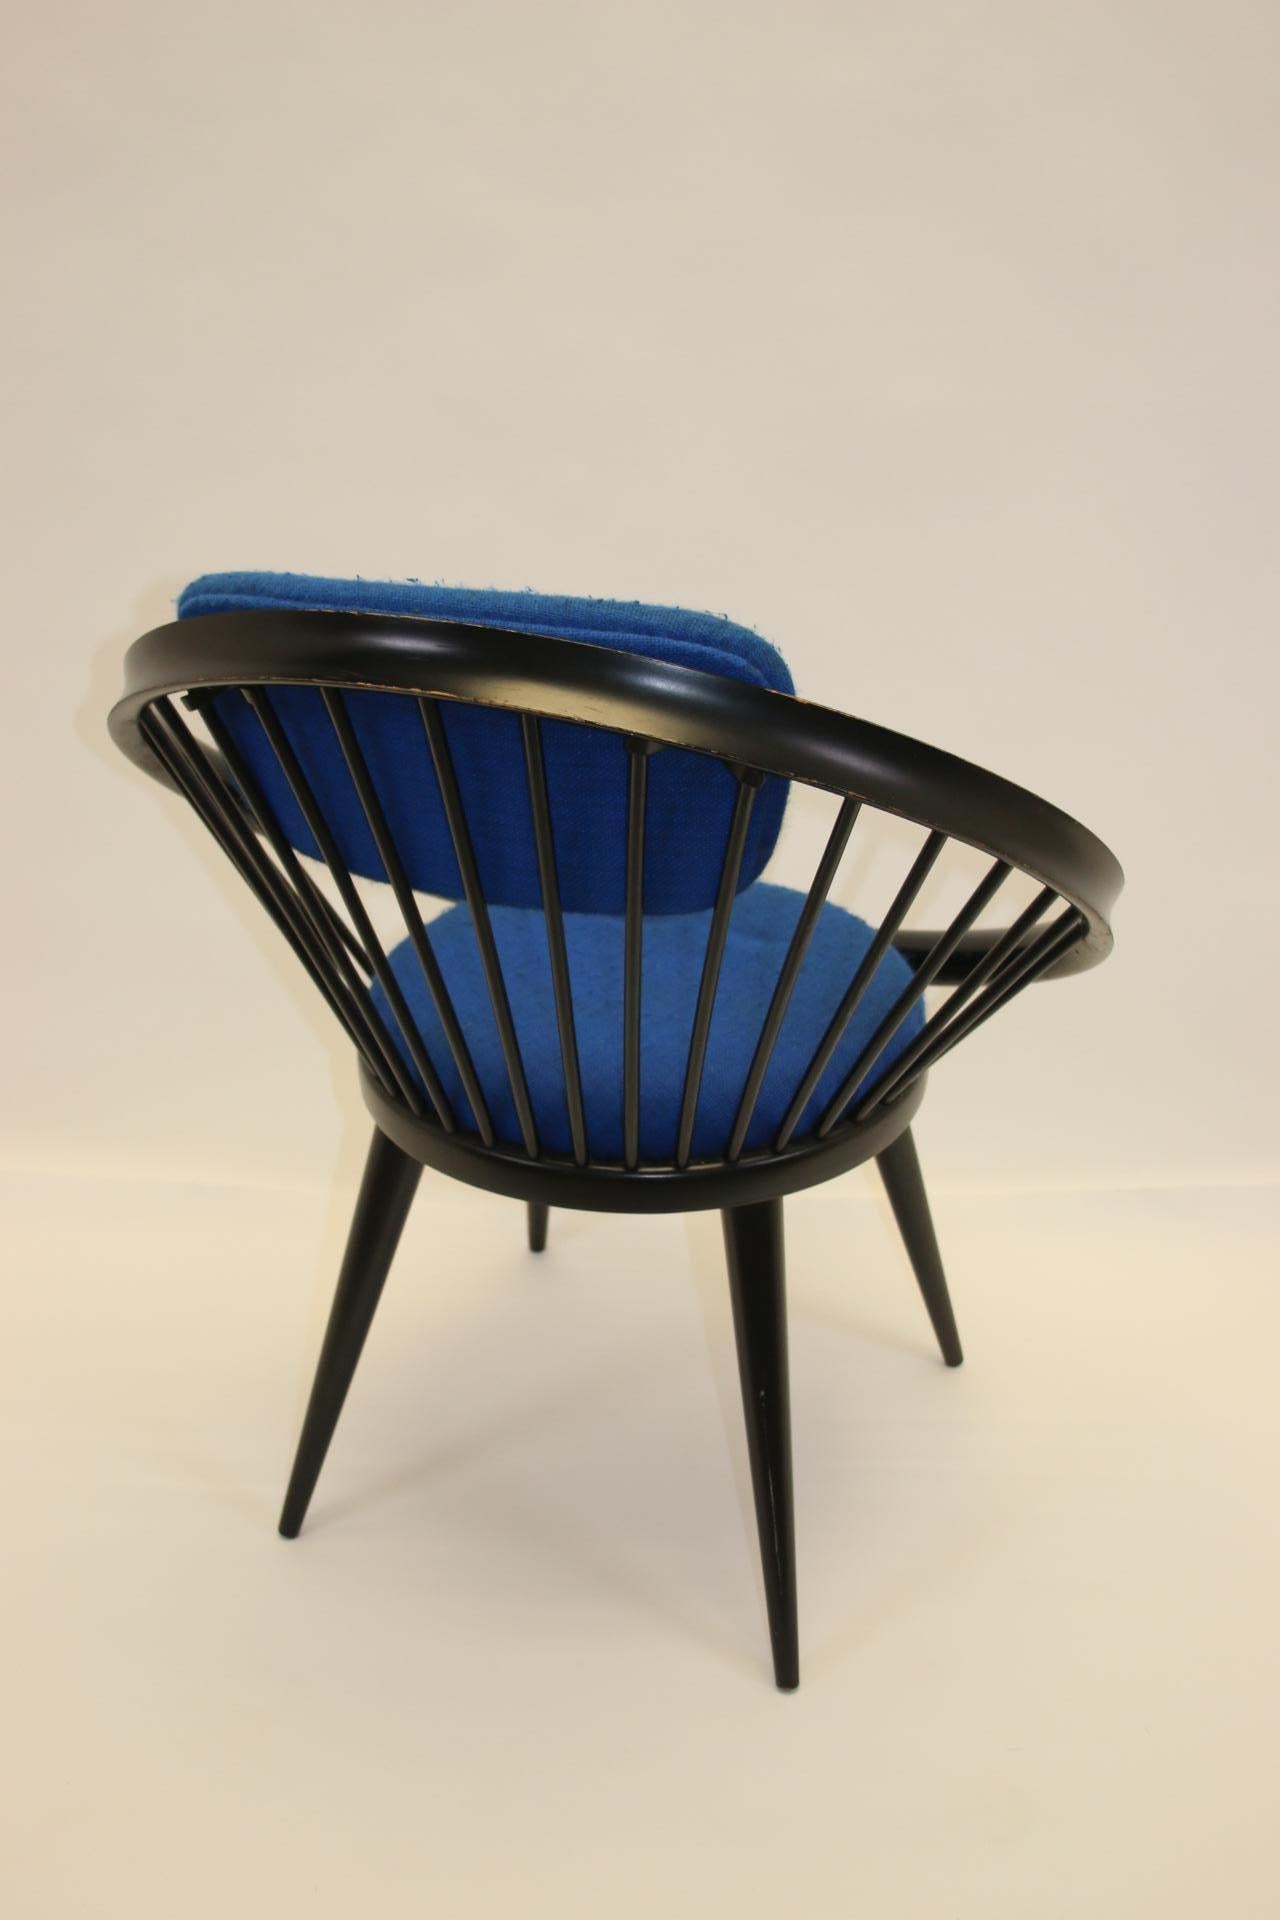 Black circle chair Vintage design chair designed by Yngve Ekstrom

made in the sixties by Swedese Meubel factory.

In Sweden

Beautiful model, original black lacquered chair and beautiful blue upholstered fabric.

The condition is good